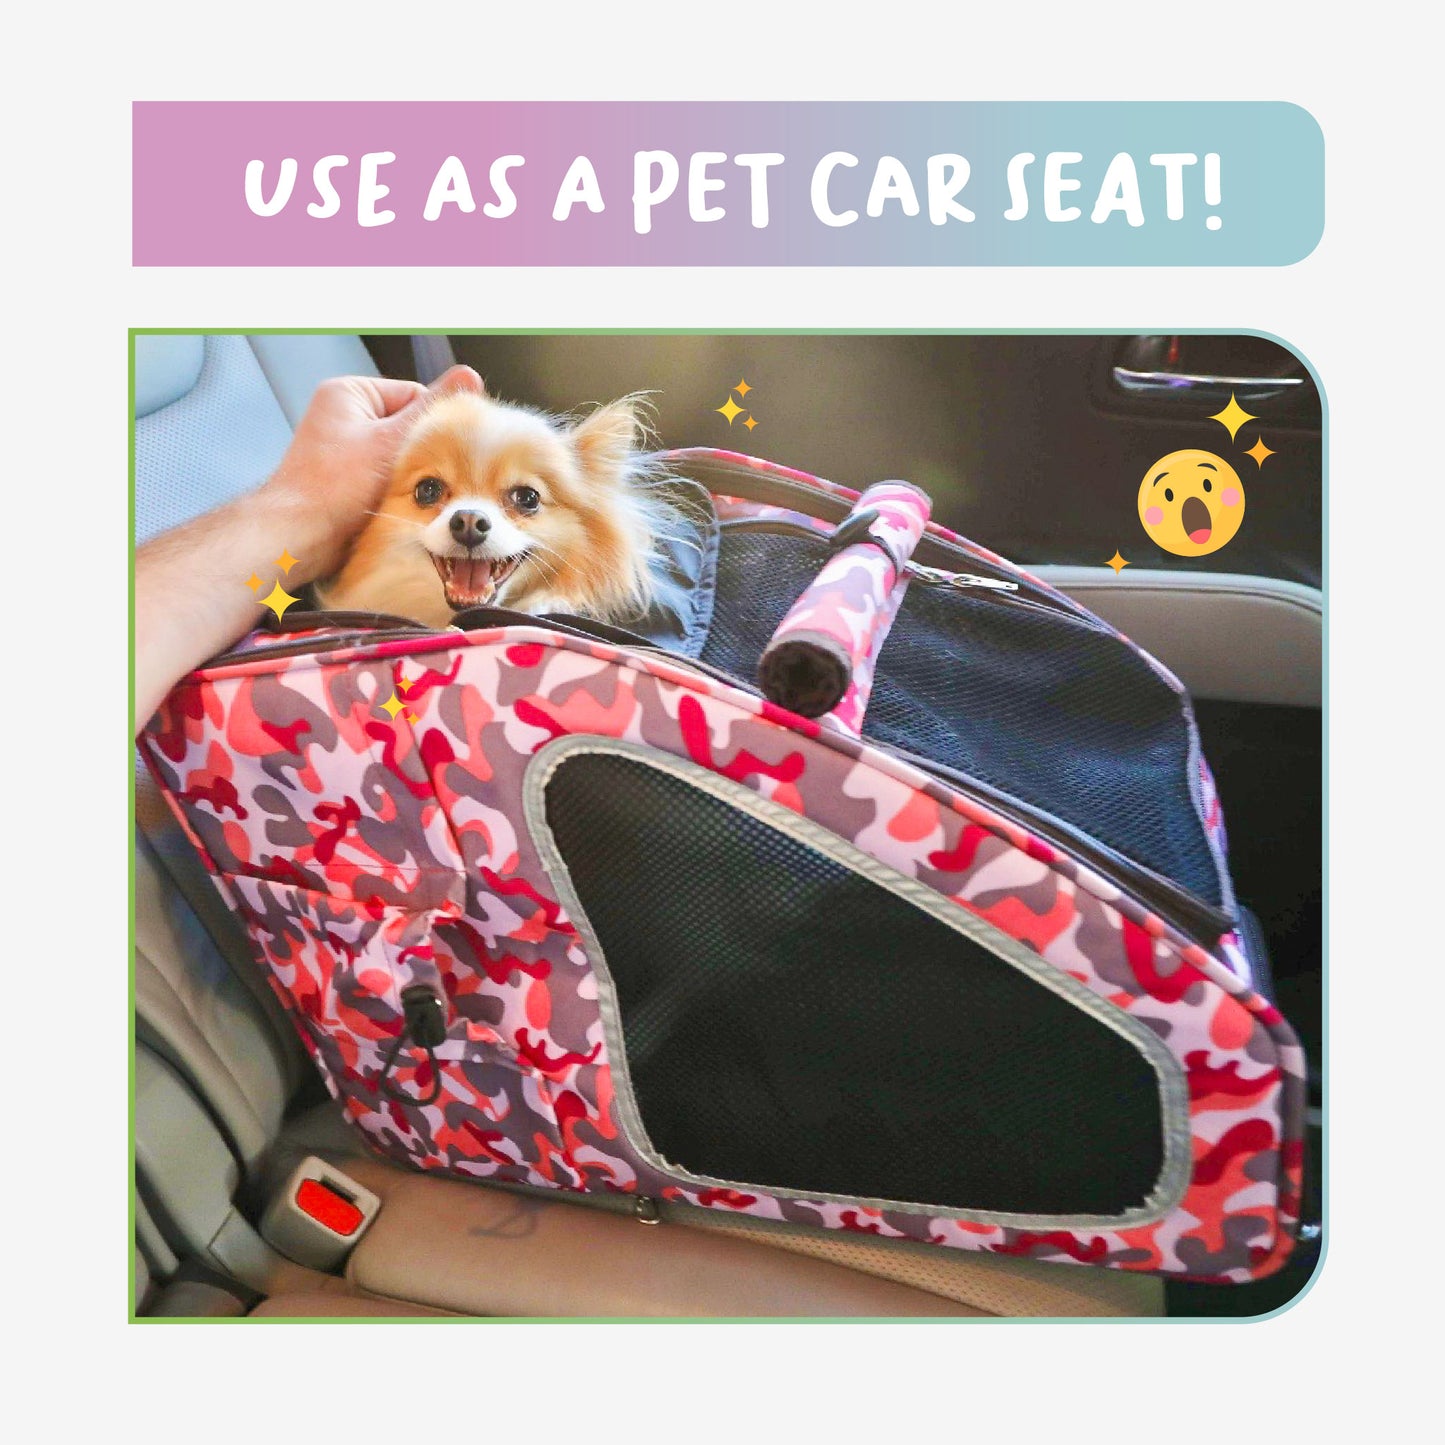 5-in-1 pet carrier as a pet car seat